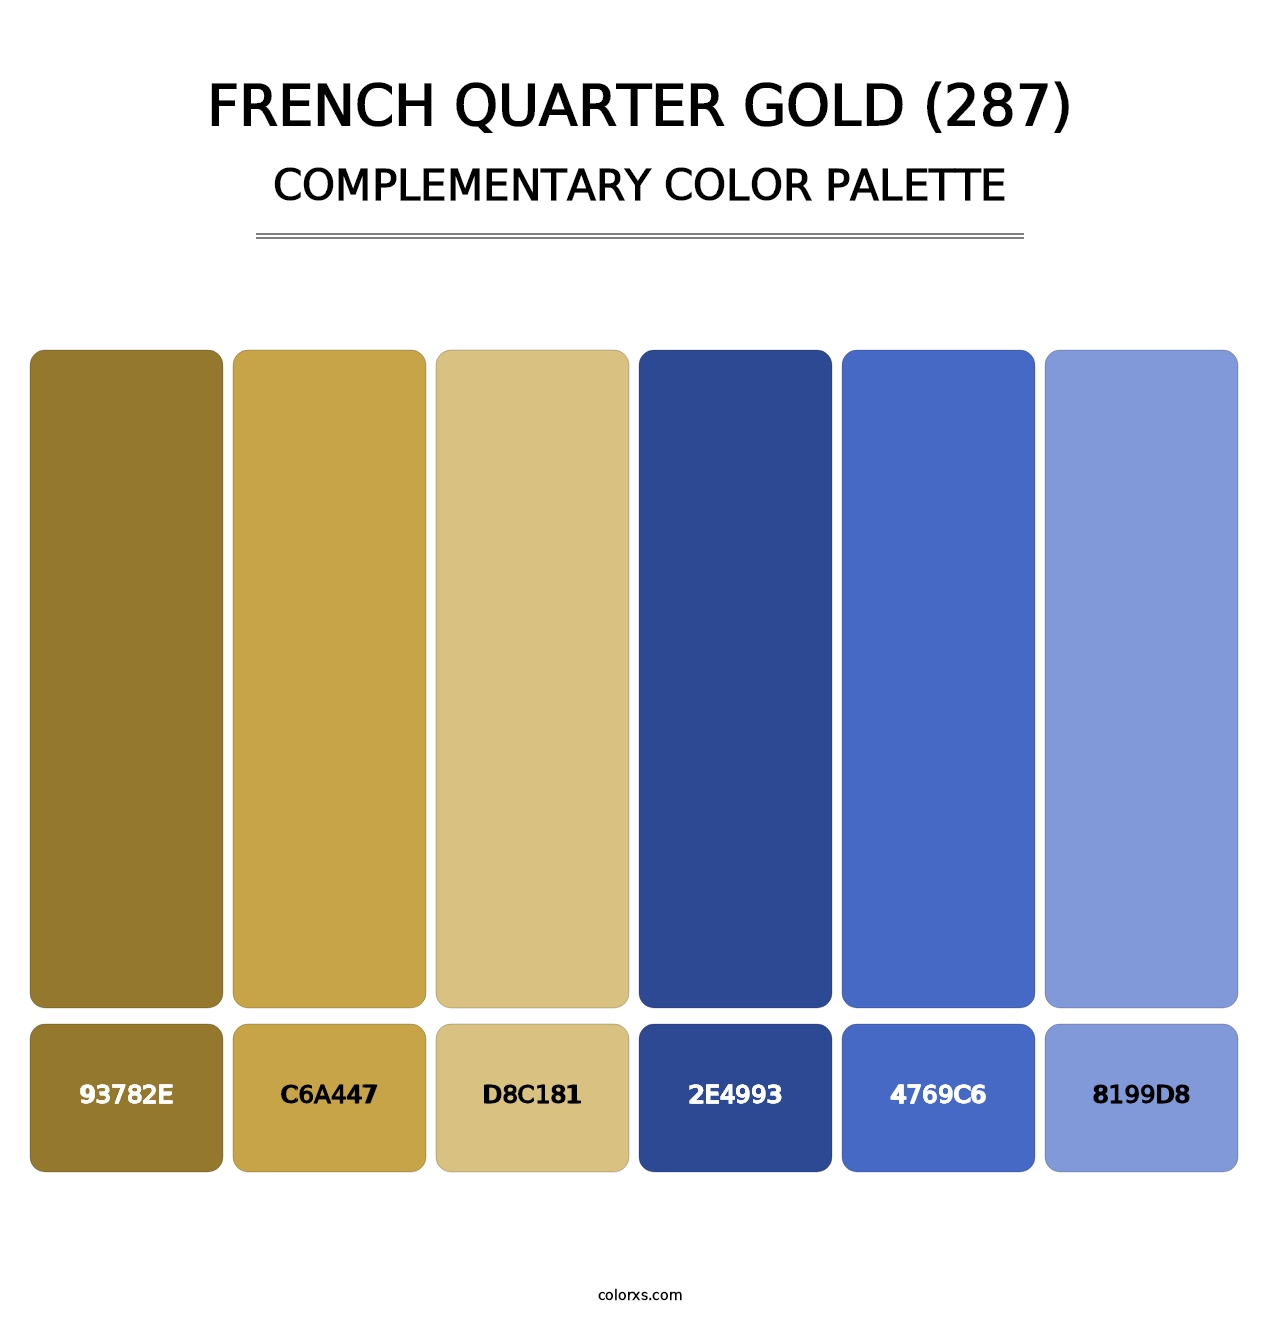 French Quarter Gold (287) - Complementary Color Palette